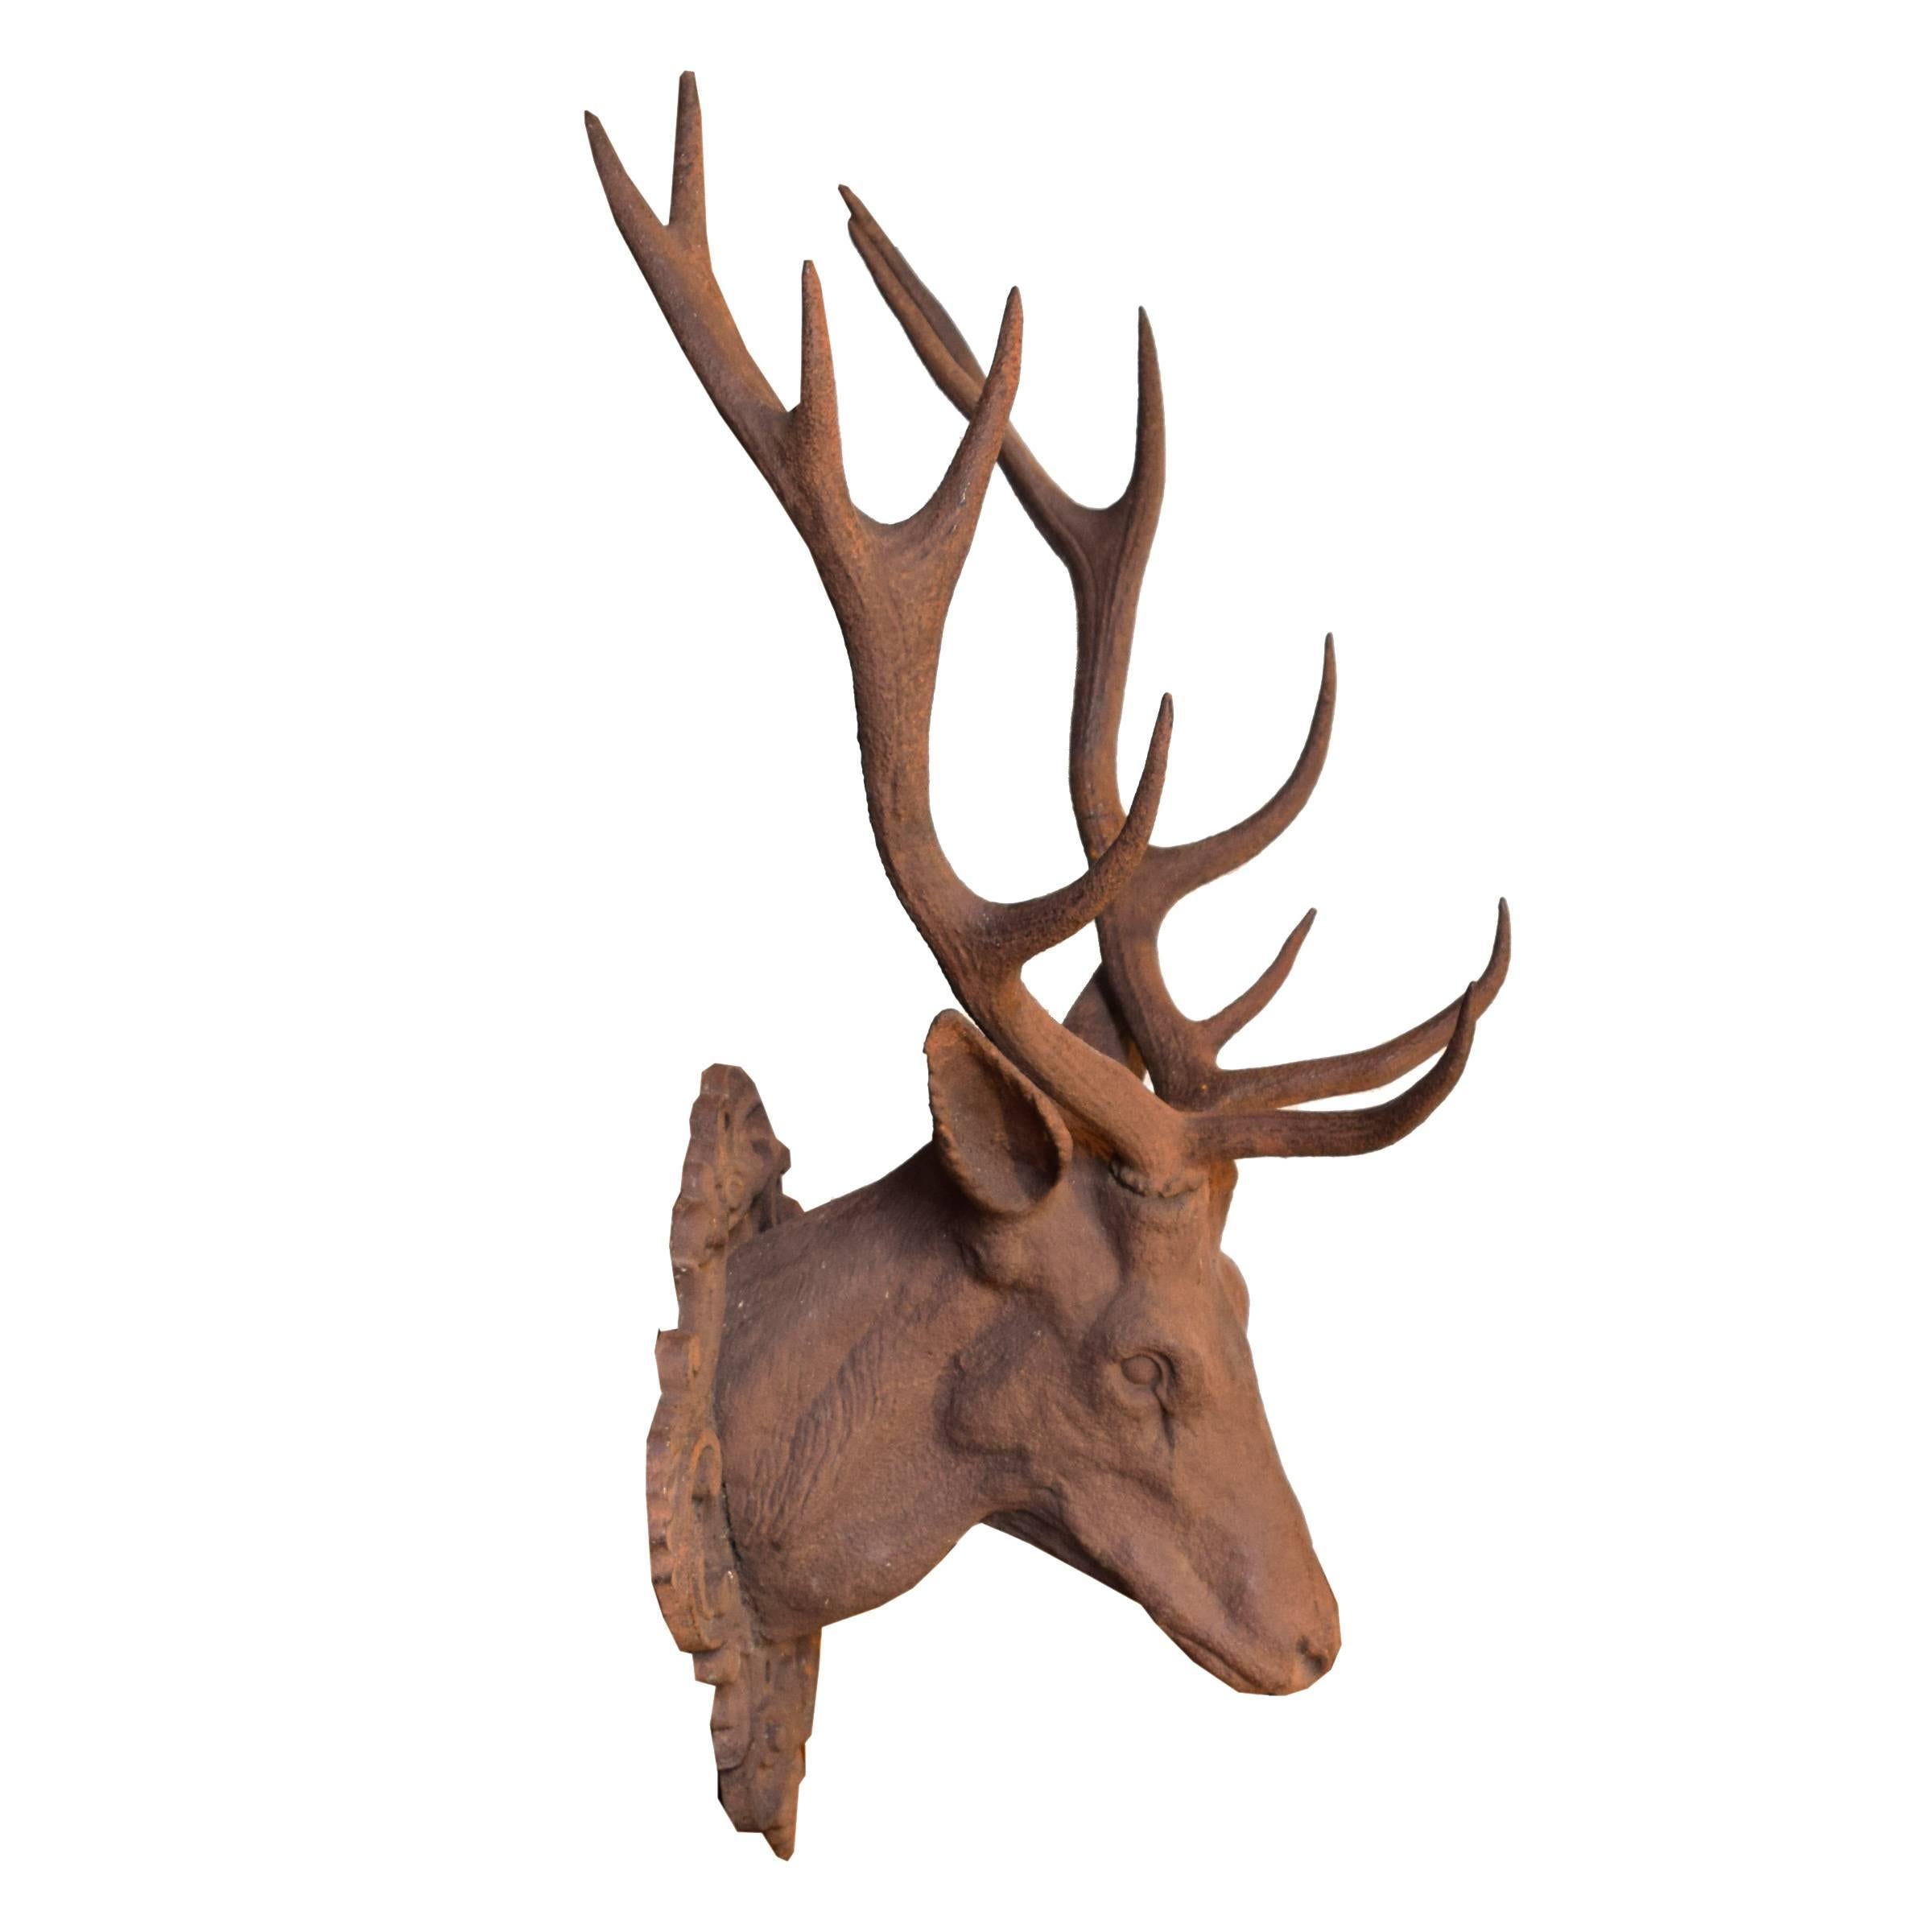 A wonderfully detailed and rare full-scale cast iron deer trophy mount from a Bavarian royal hunting lodge, 19th century.